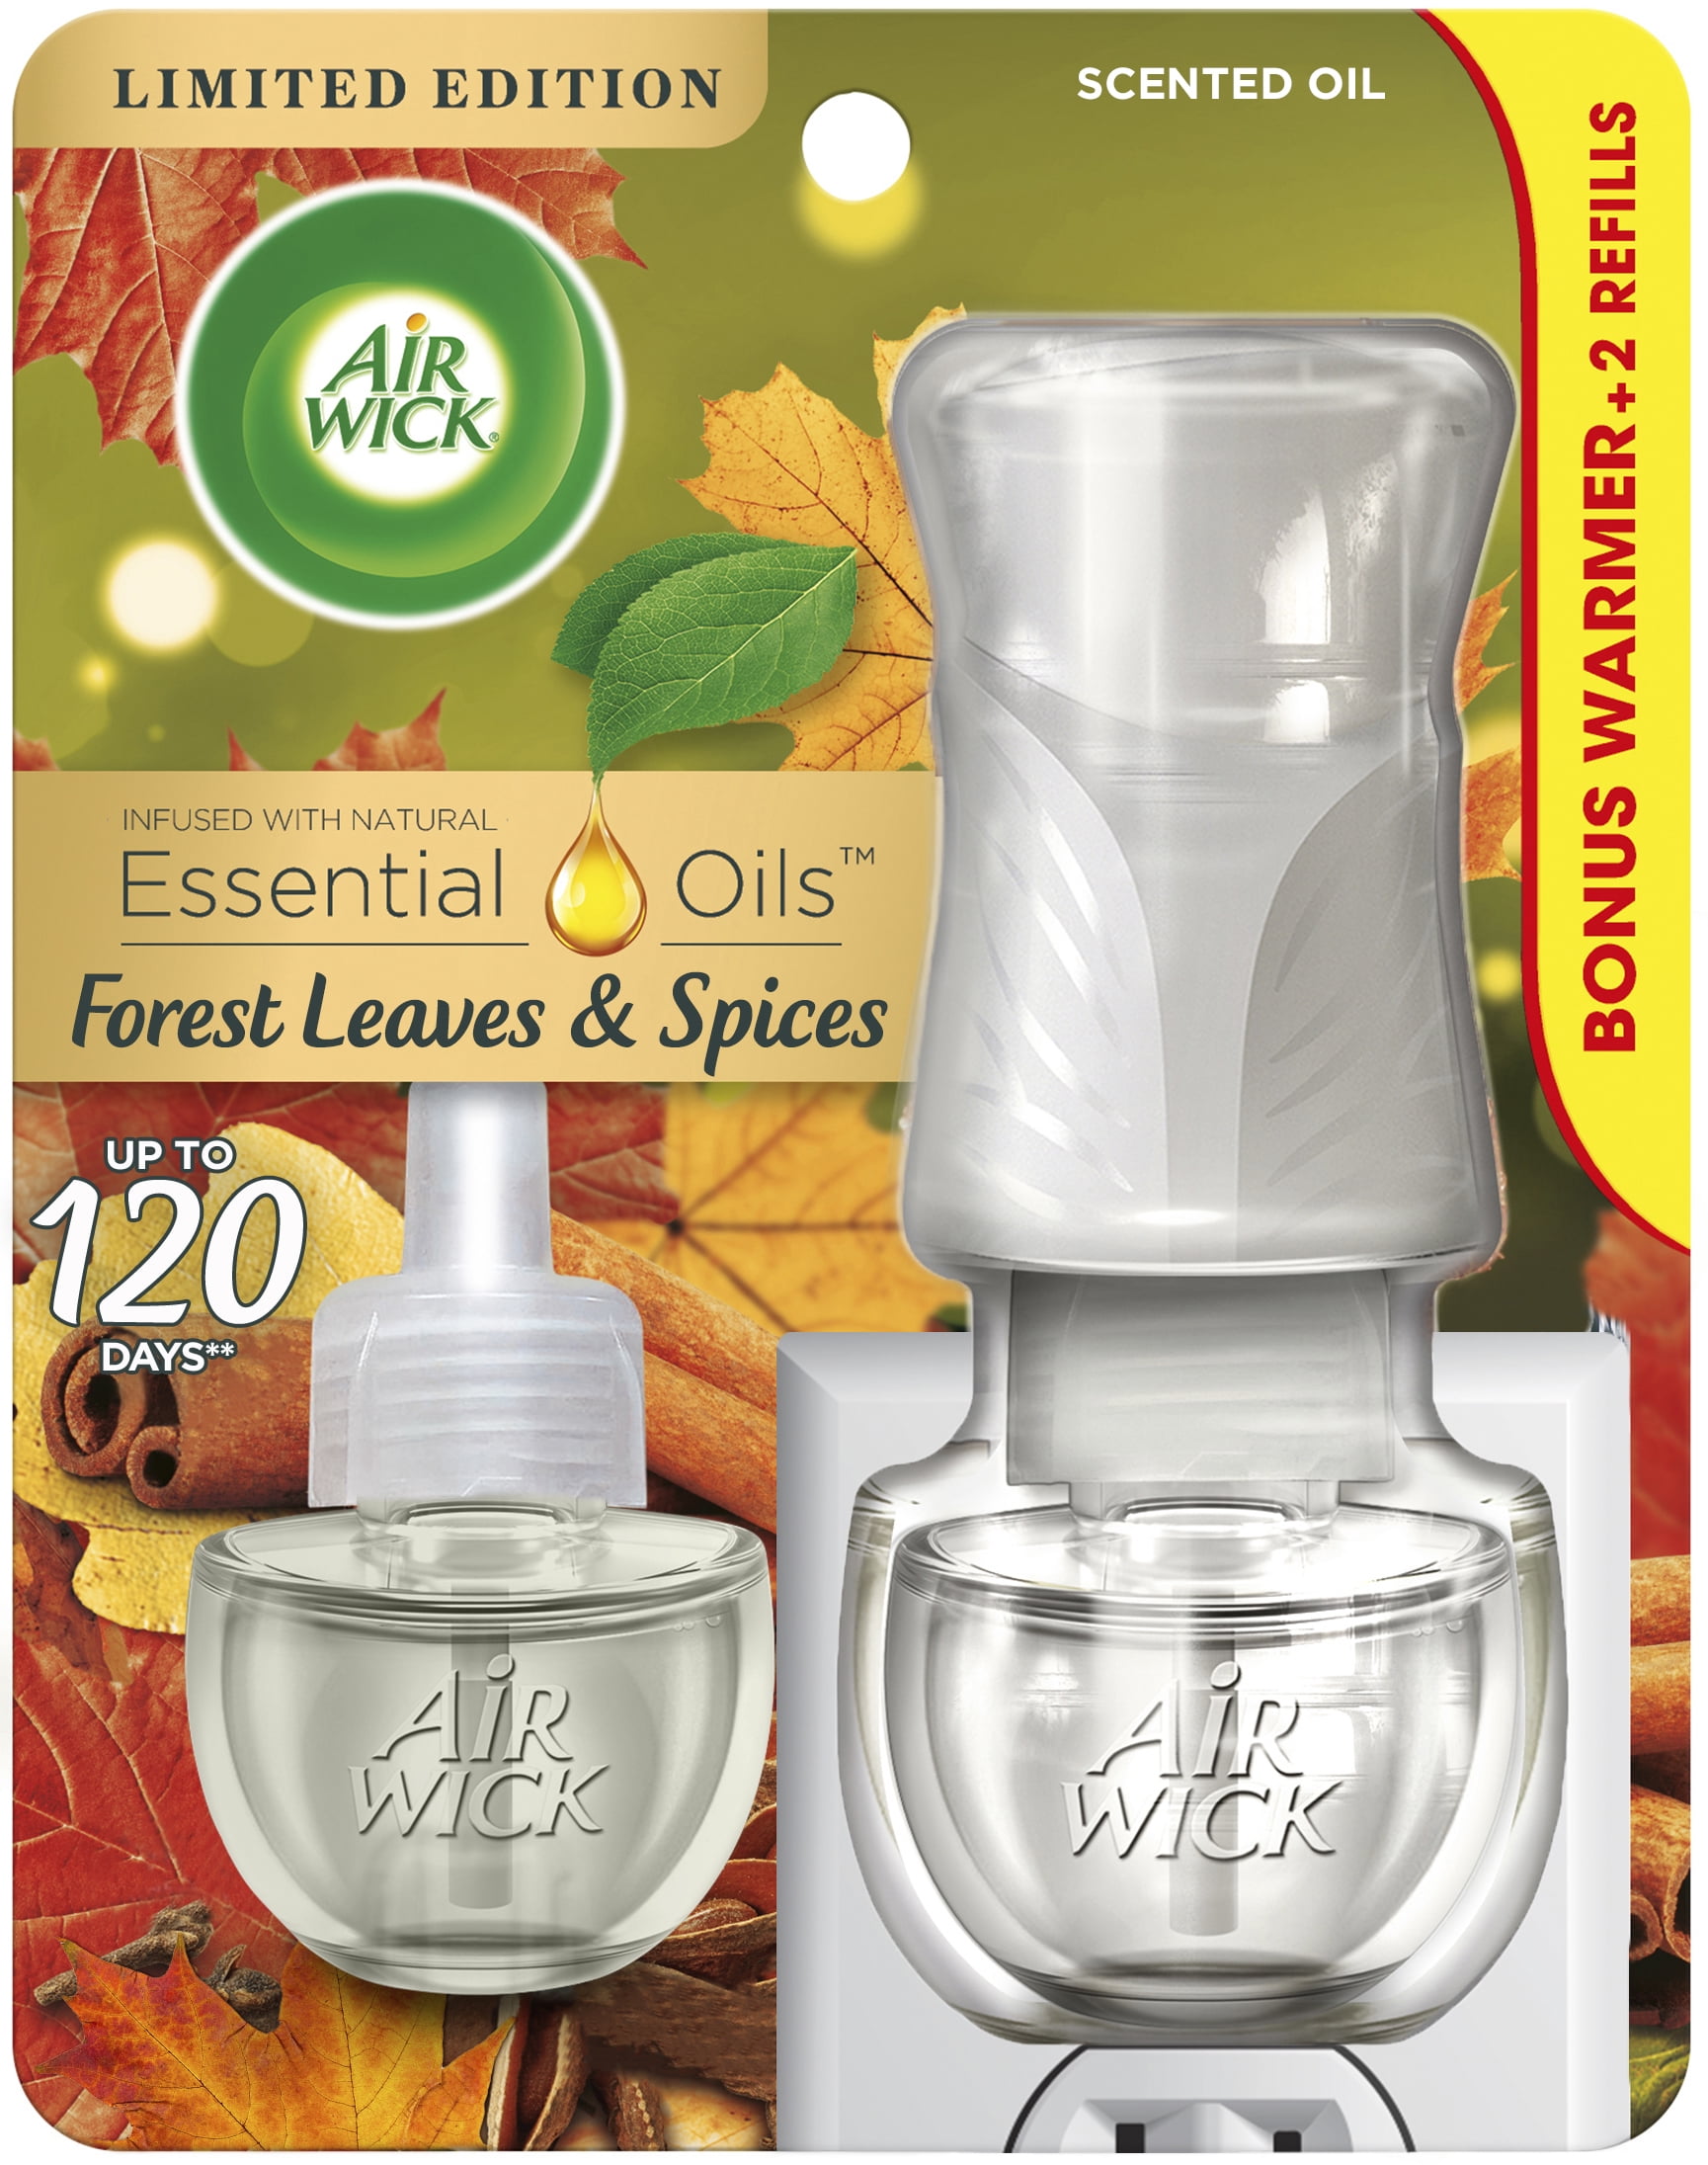 Air Wick Plug-in Scented Oil Air Freshener Starter Kit + $6 Walmart Cash from $6 + Free Store Pickup